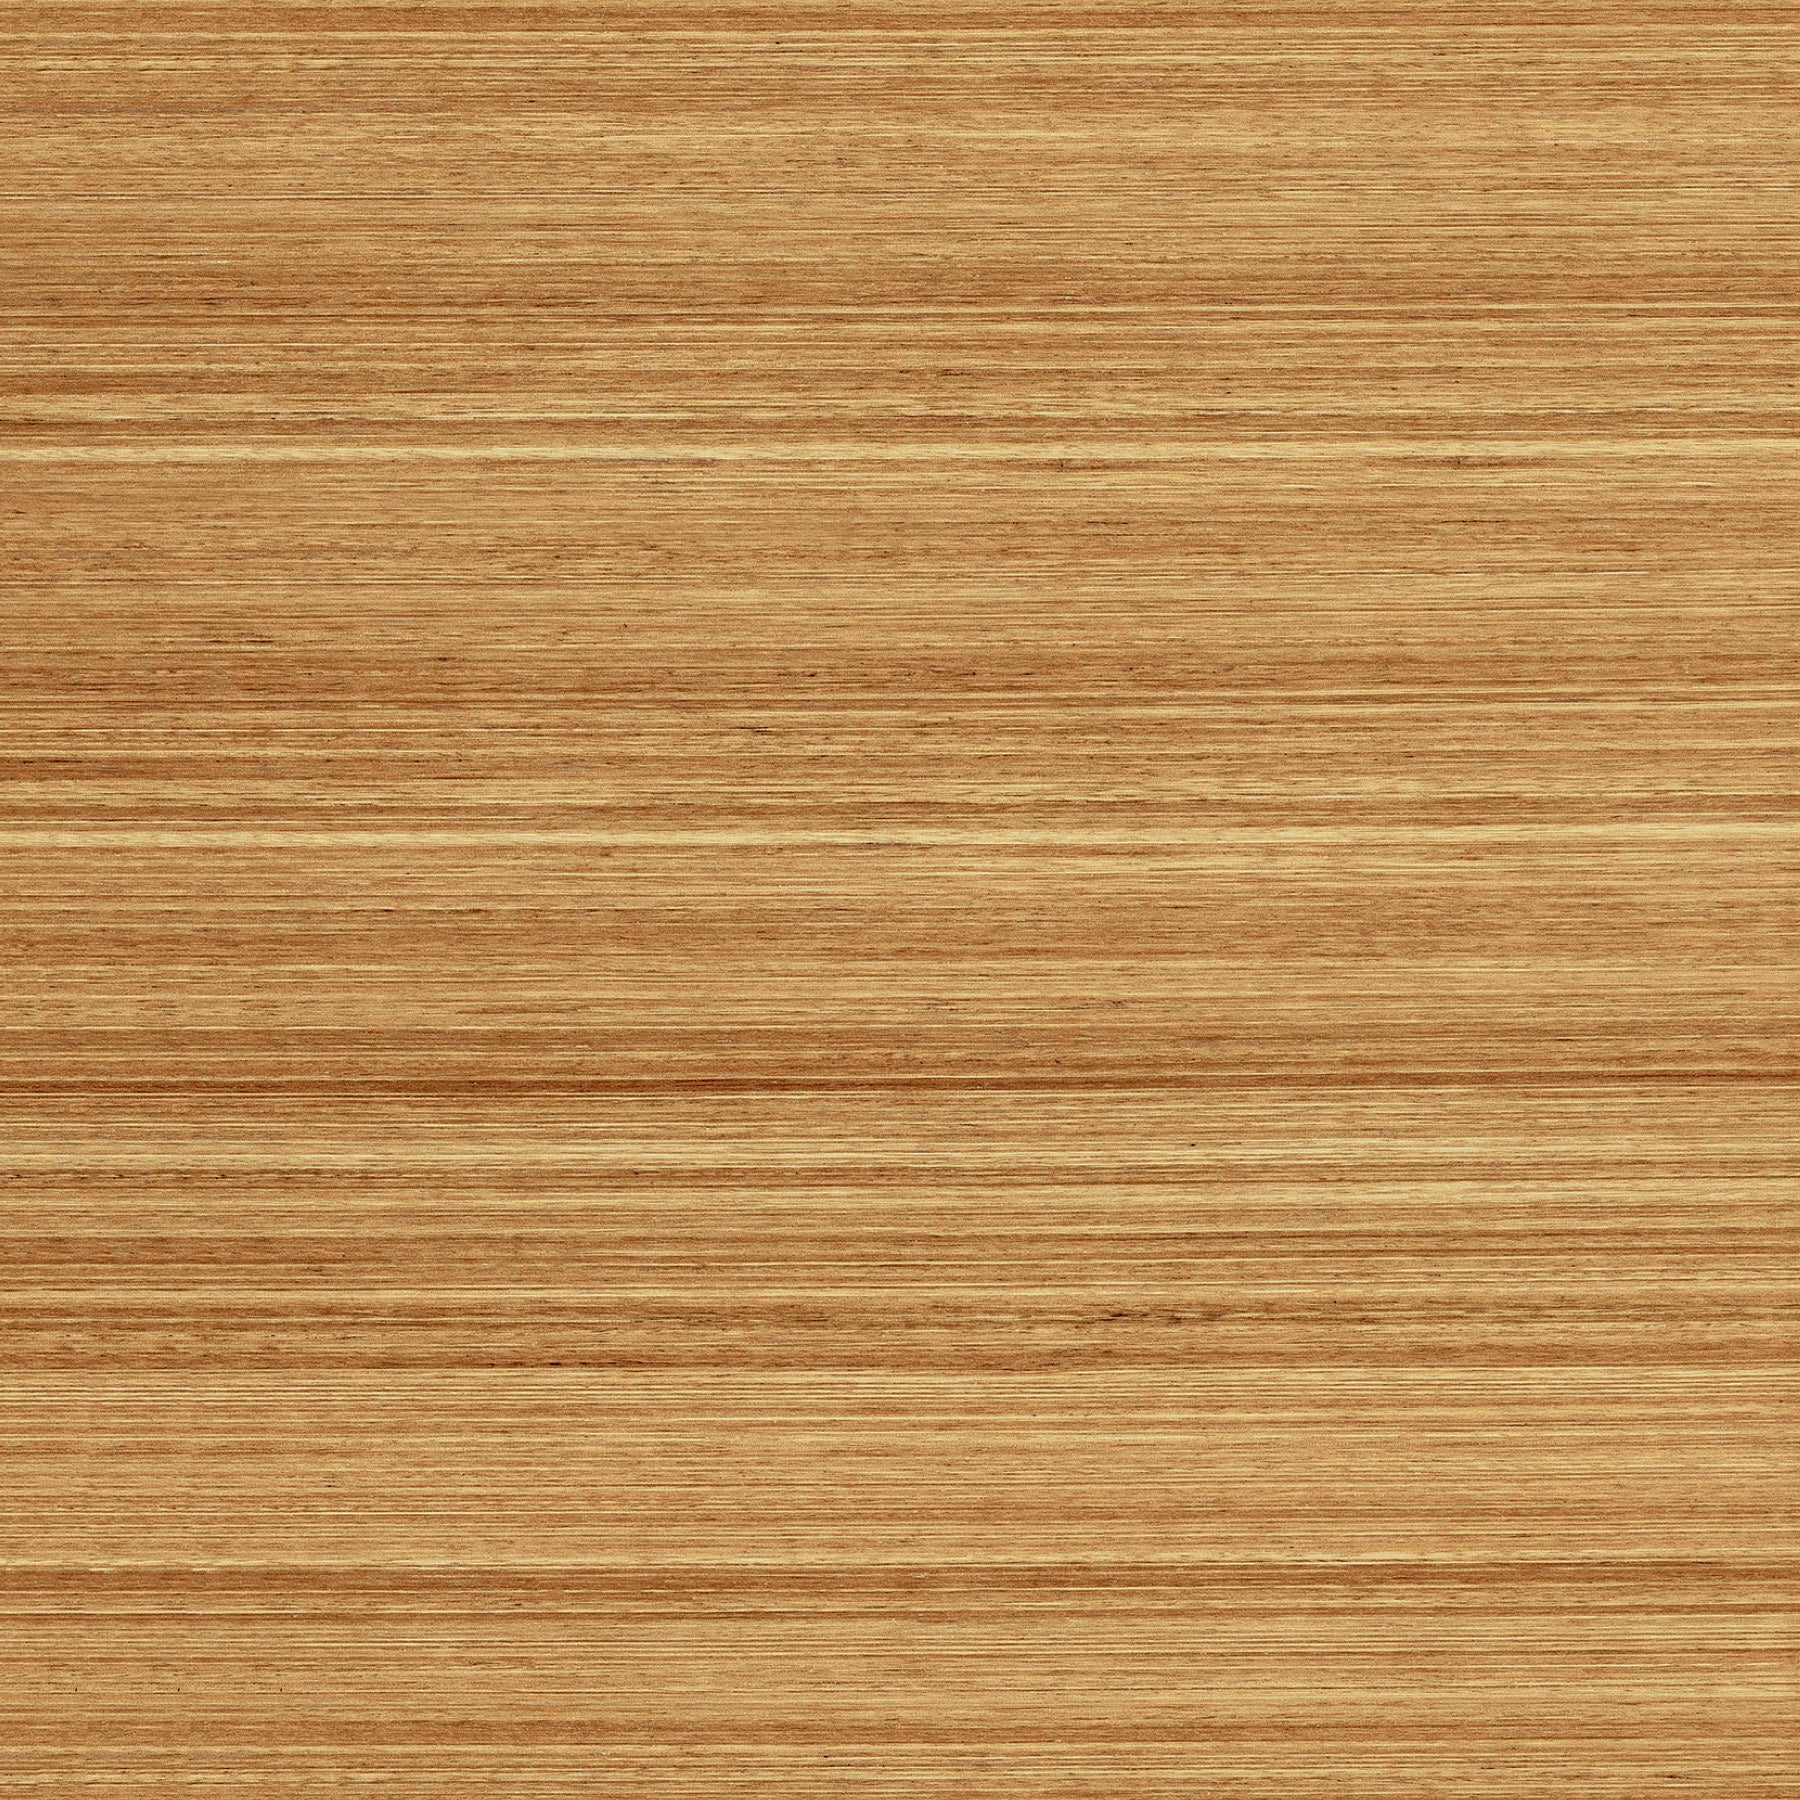 Tasmanian Oak is a sustainable native Australian hardwood. It is recognised for its excellent staining qualities, which allow ready matching with other timbers, finishes or furnishings. Colour: varying from light straw to reddish brown with intermediate shades of cream to pink. Order your free sample today!